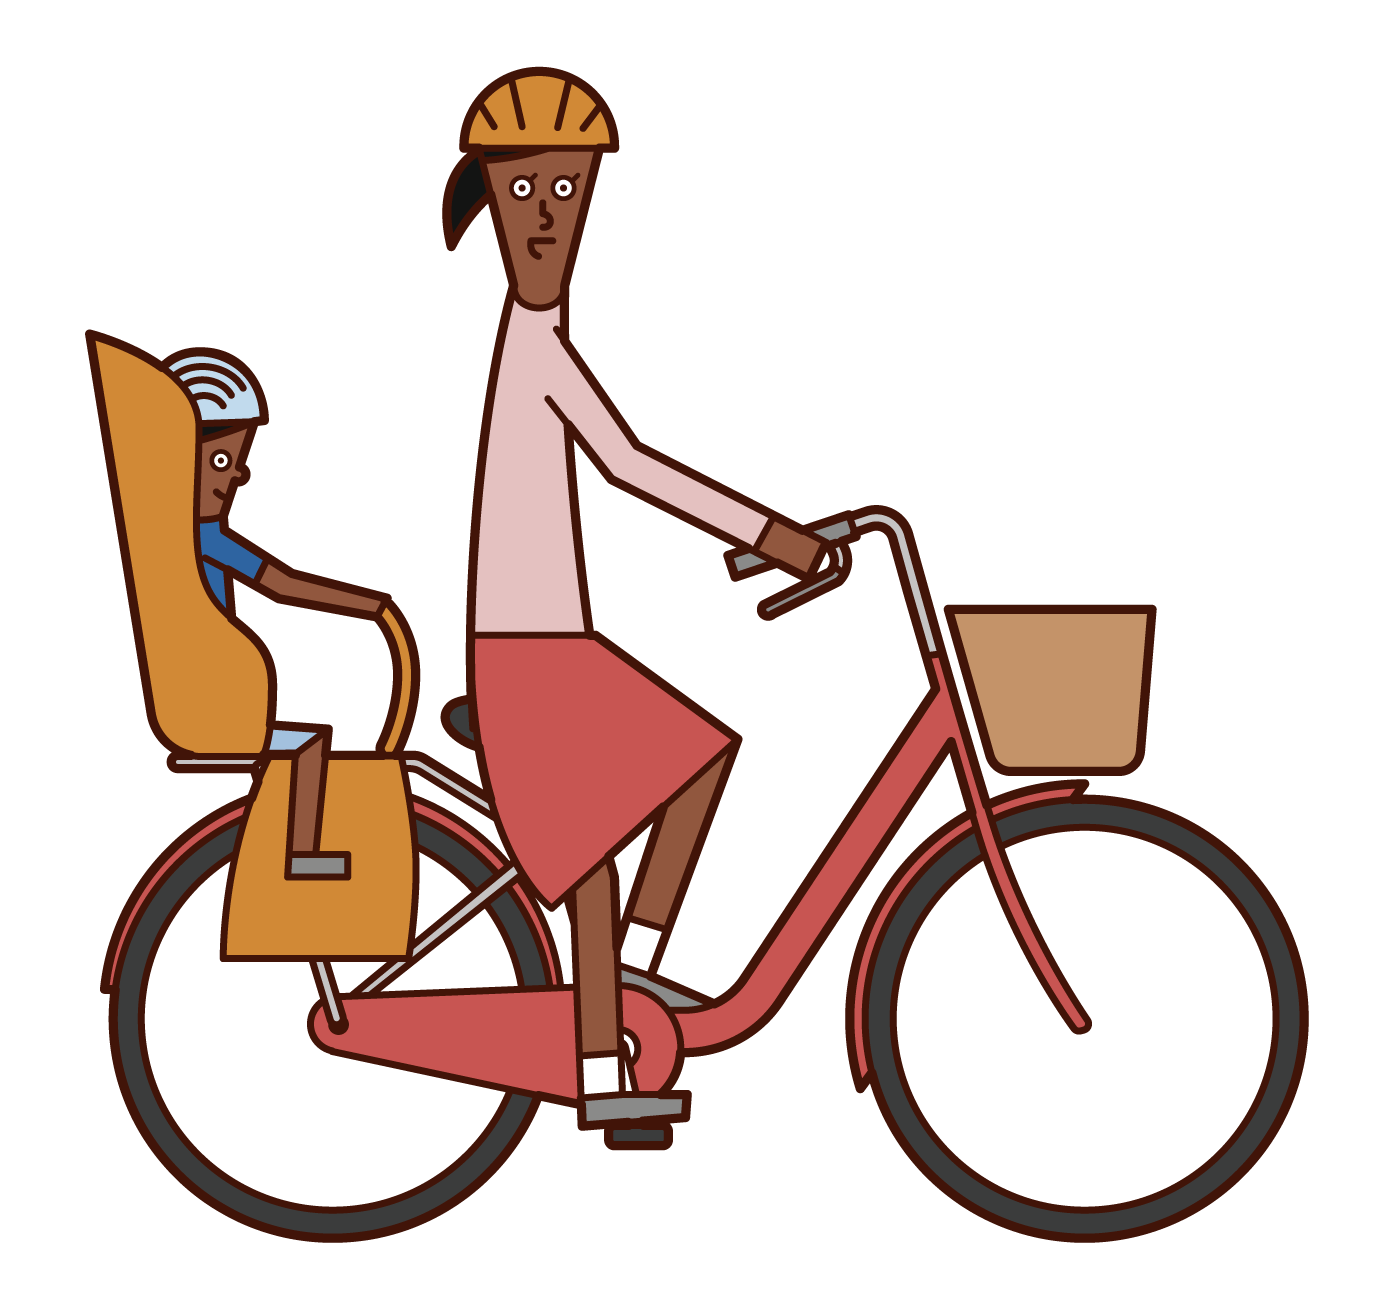 Illustration of a woman running with a child on a bicycle